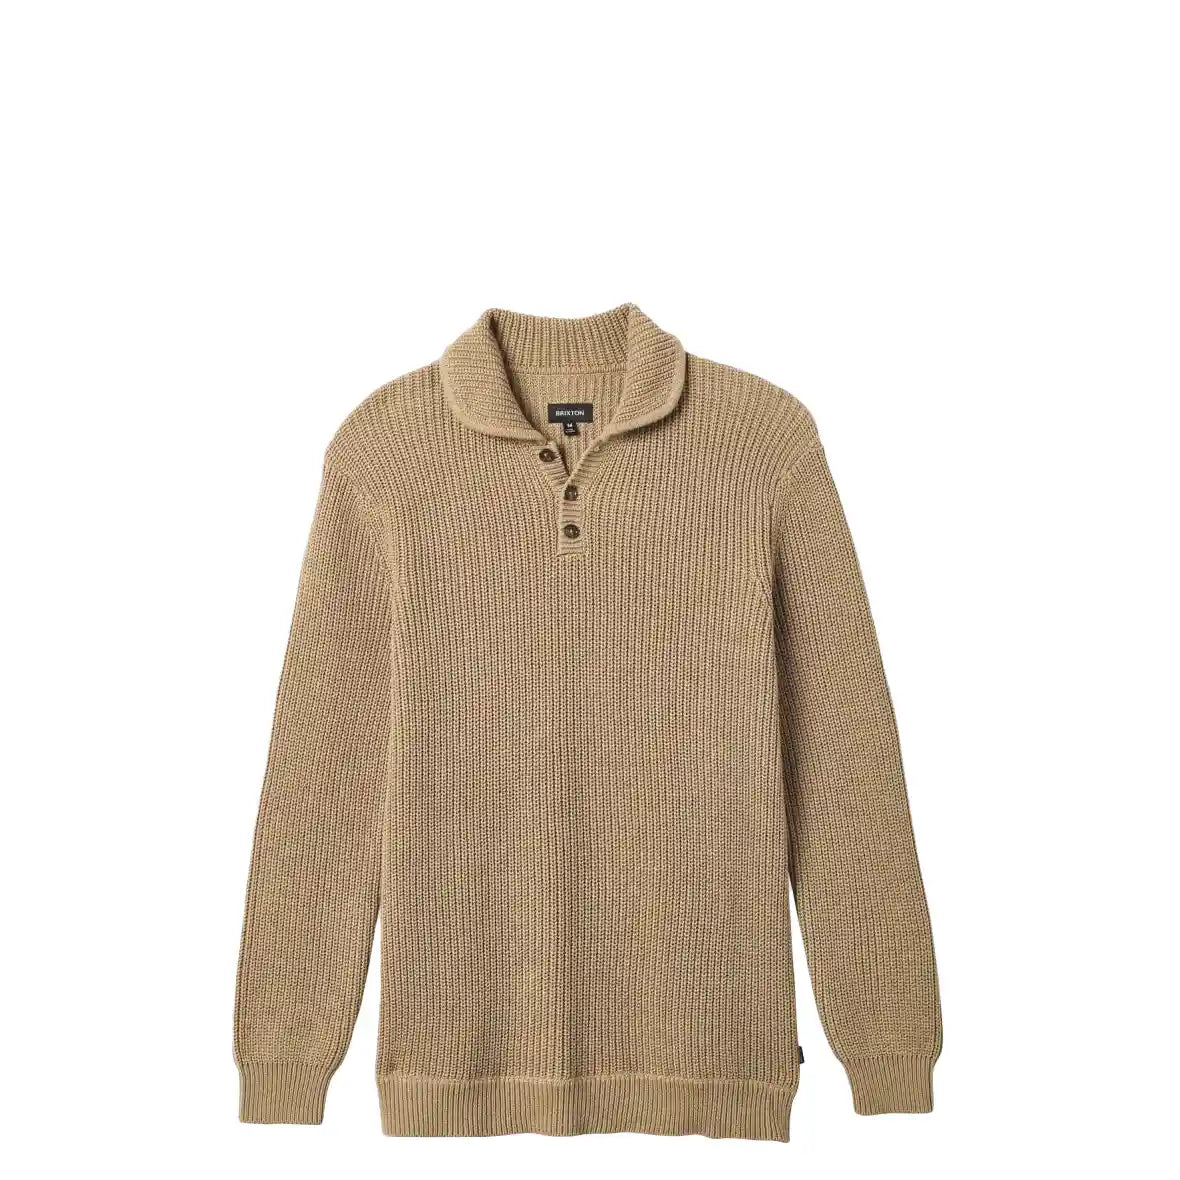 Brixton Not Your Dad's Fisherman Sweater, oatmeal, 22555-oatml